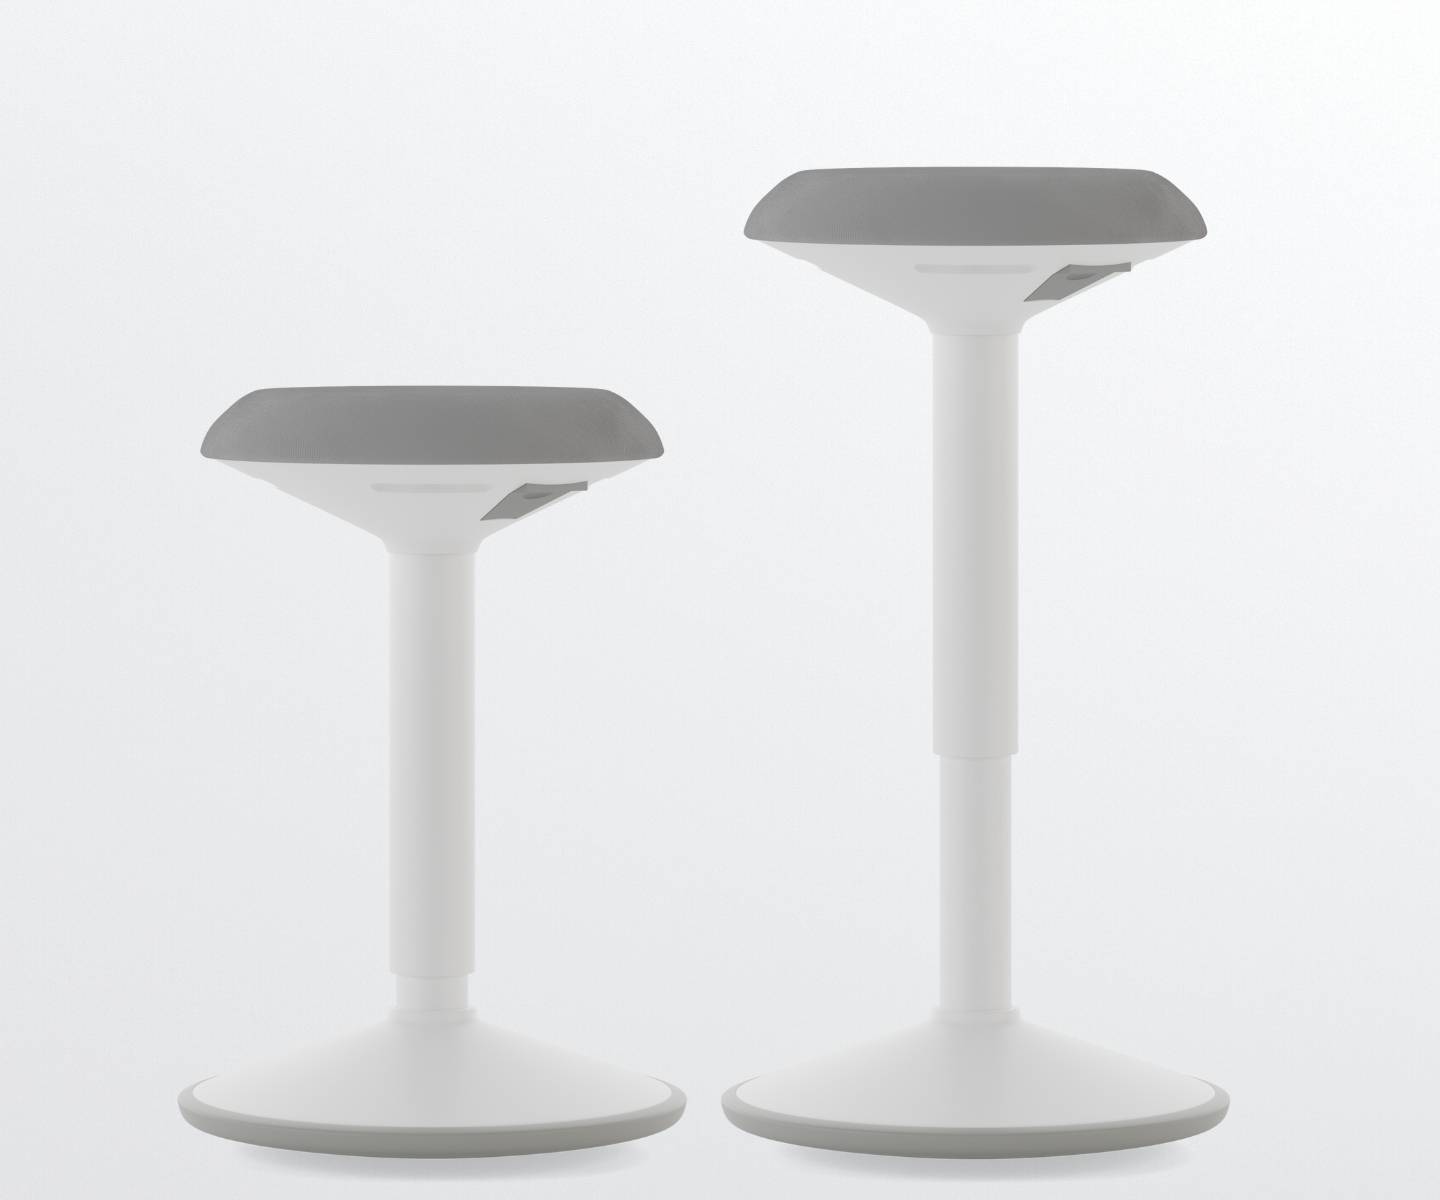 Ideal for sitting and bar tables